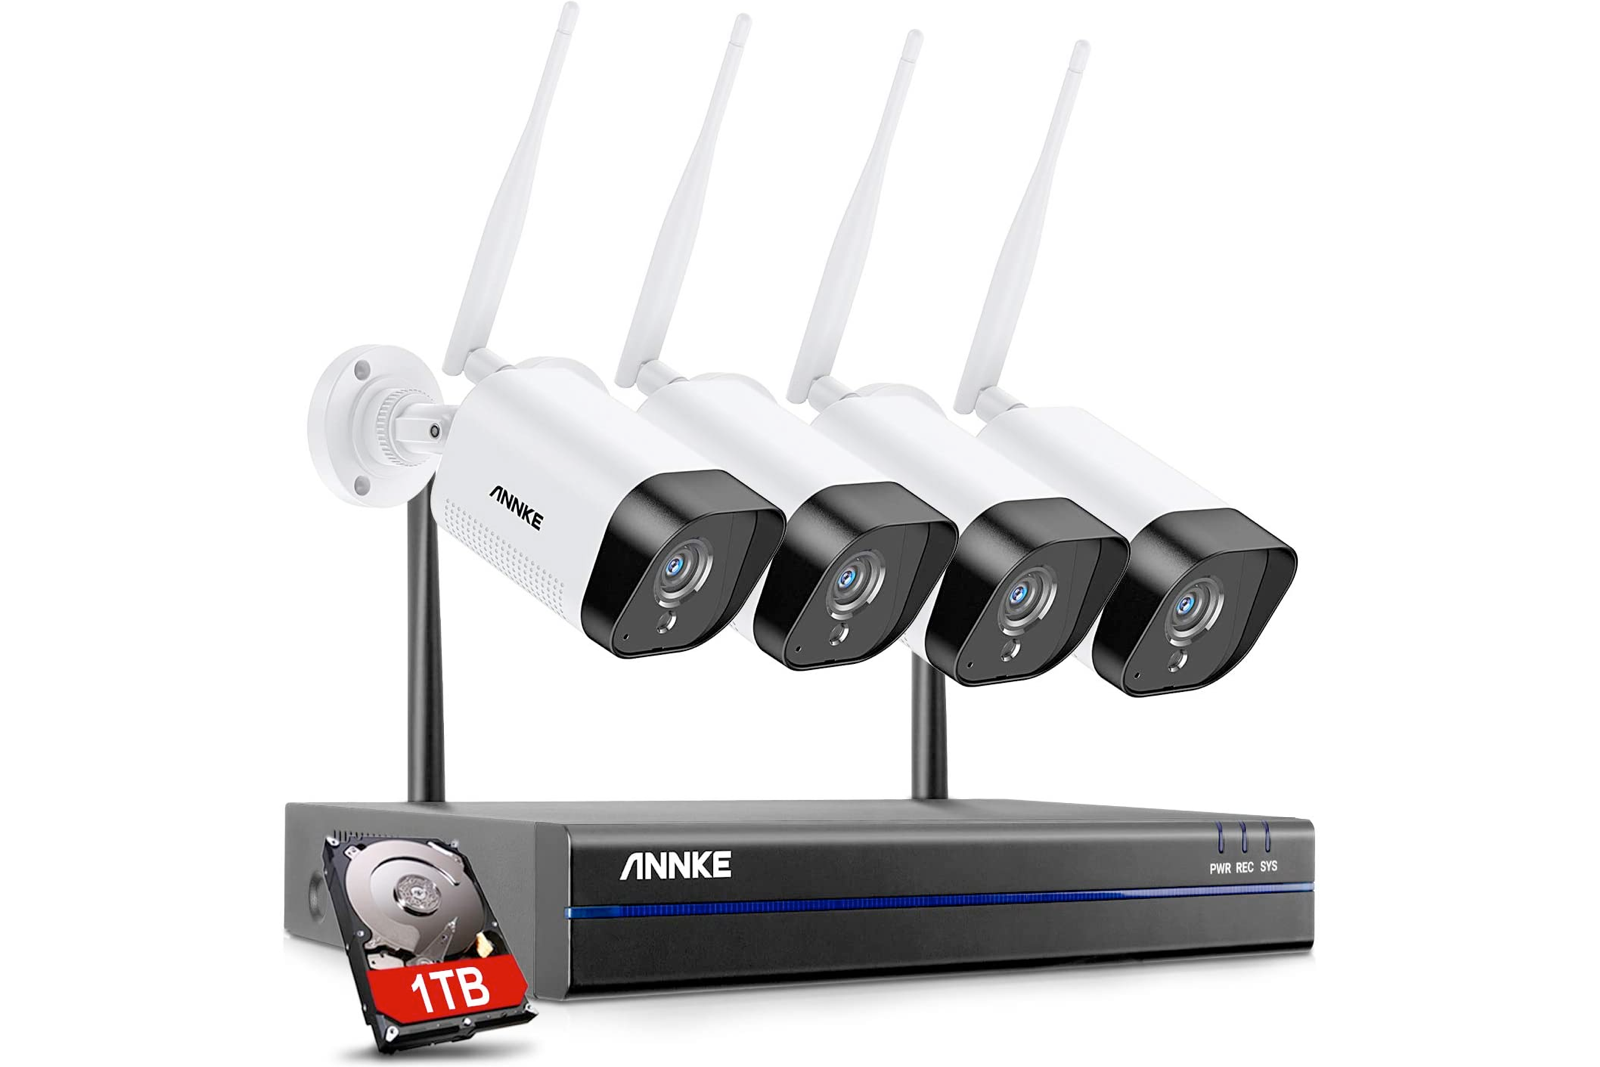 Annke home security deals for Prime Day photo 19